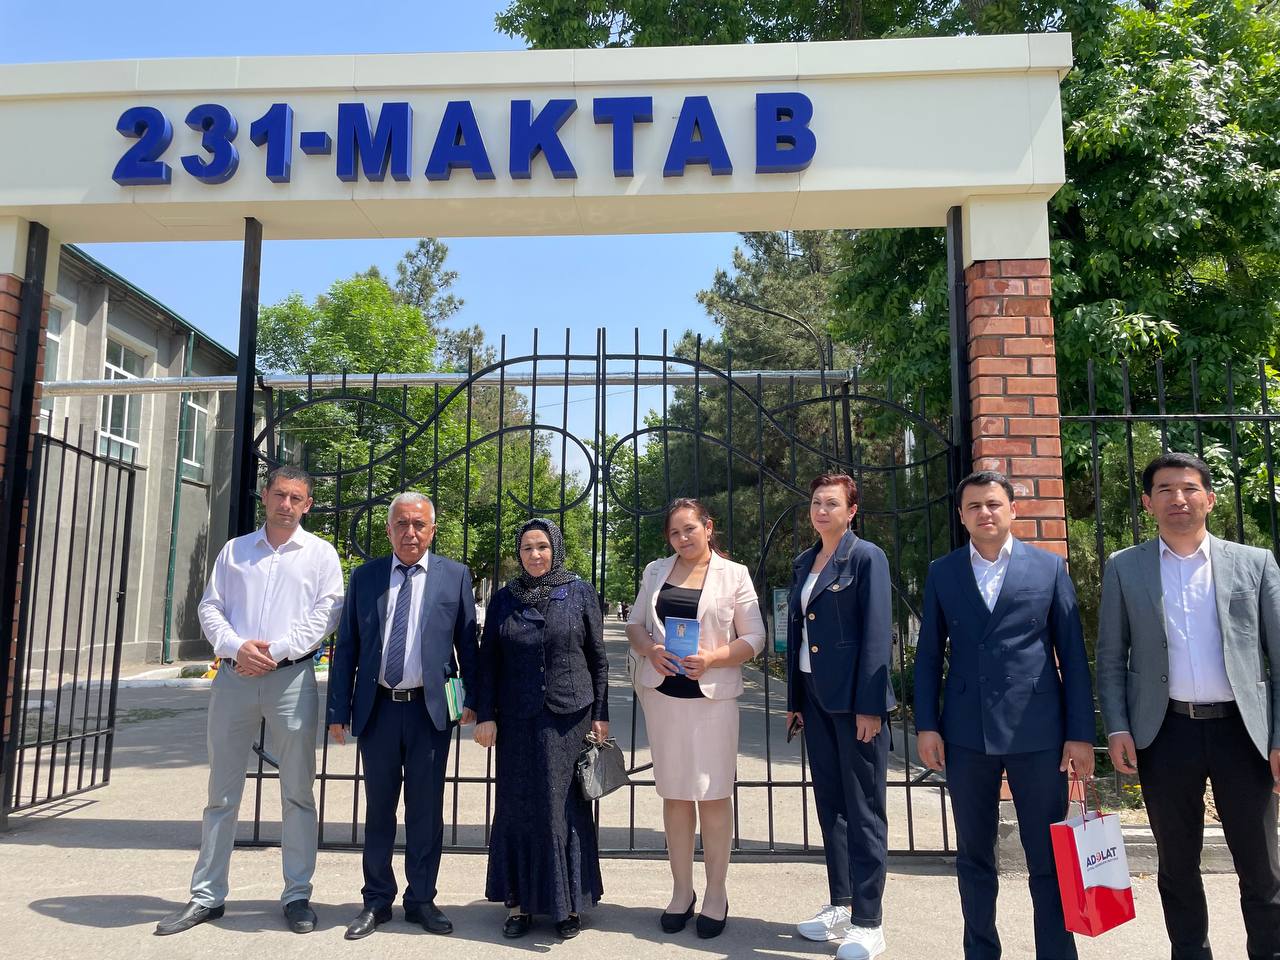 On April 24 of this year, a creative meeting was held at the State Conservatory of Uzbekistan with members of the Union of Writers Umida Abduazimova, Islam Hamroyev, Adiba Umirova within the framework of the "Sharing Enlightenment" project.